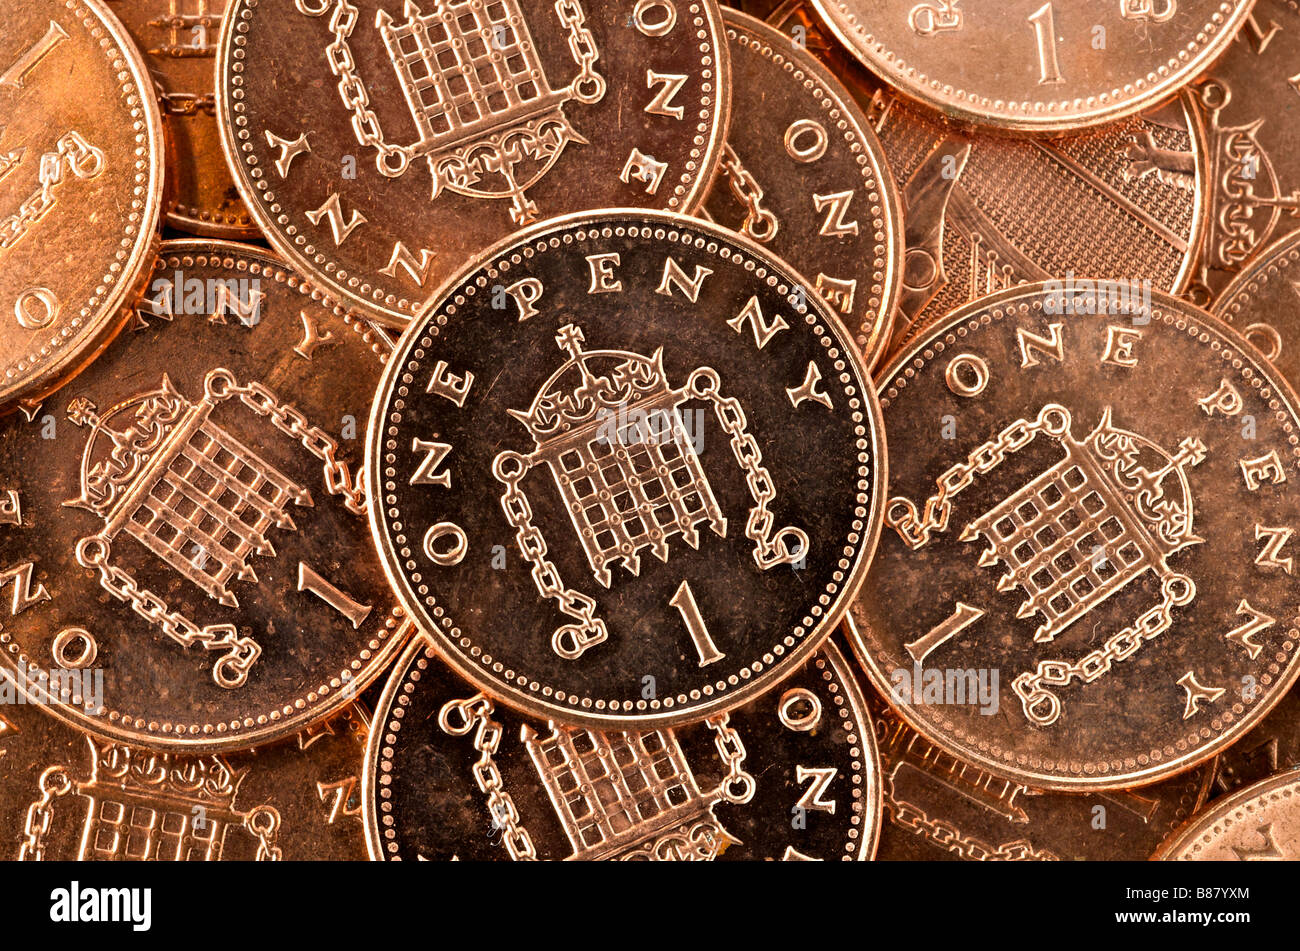 British one penny coins Stock Photo